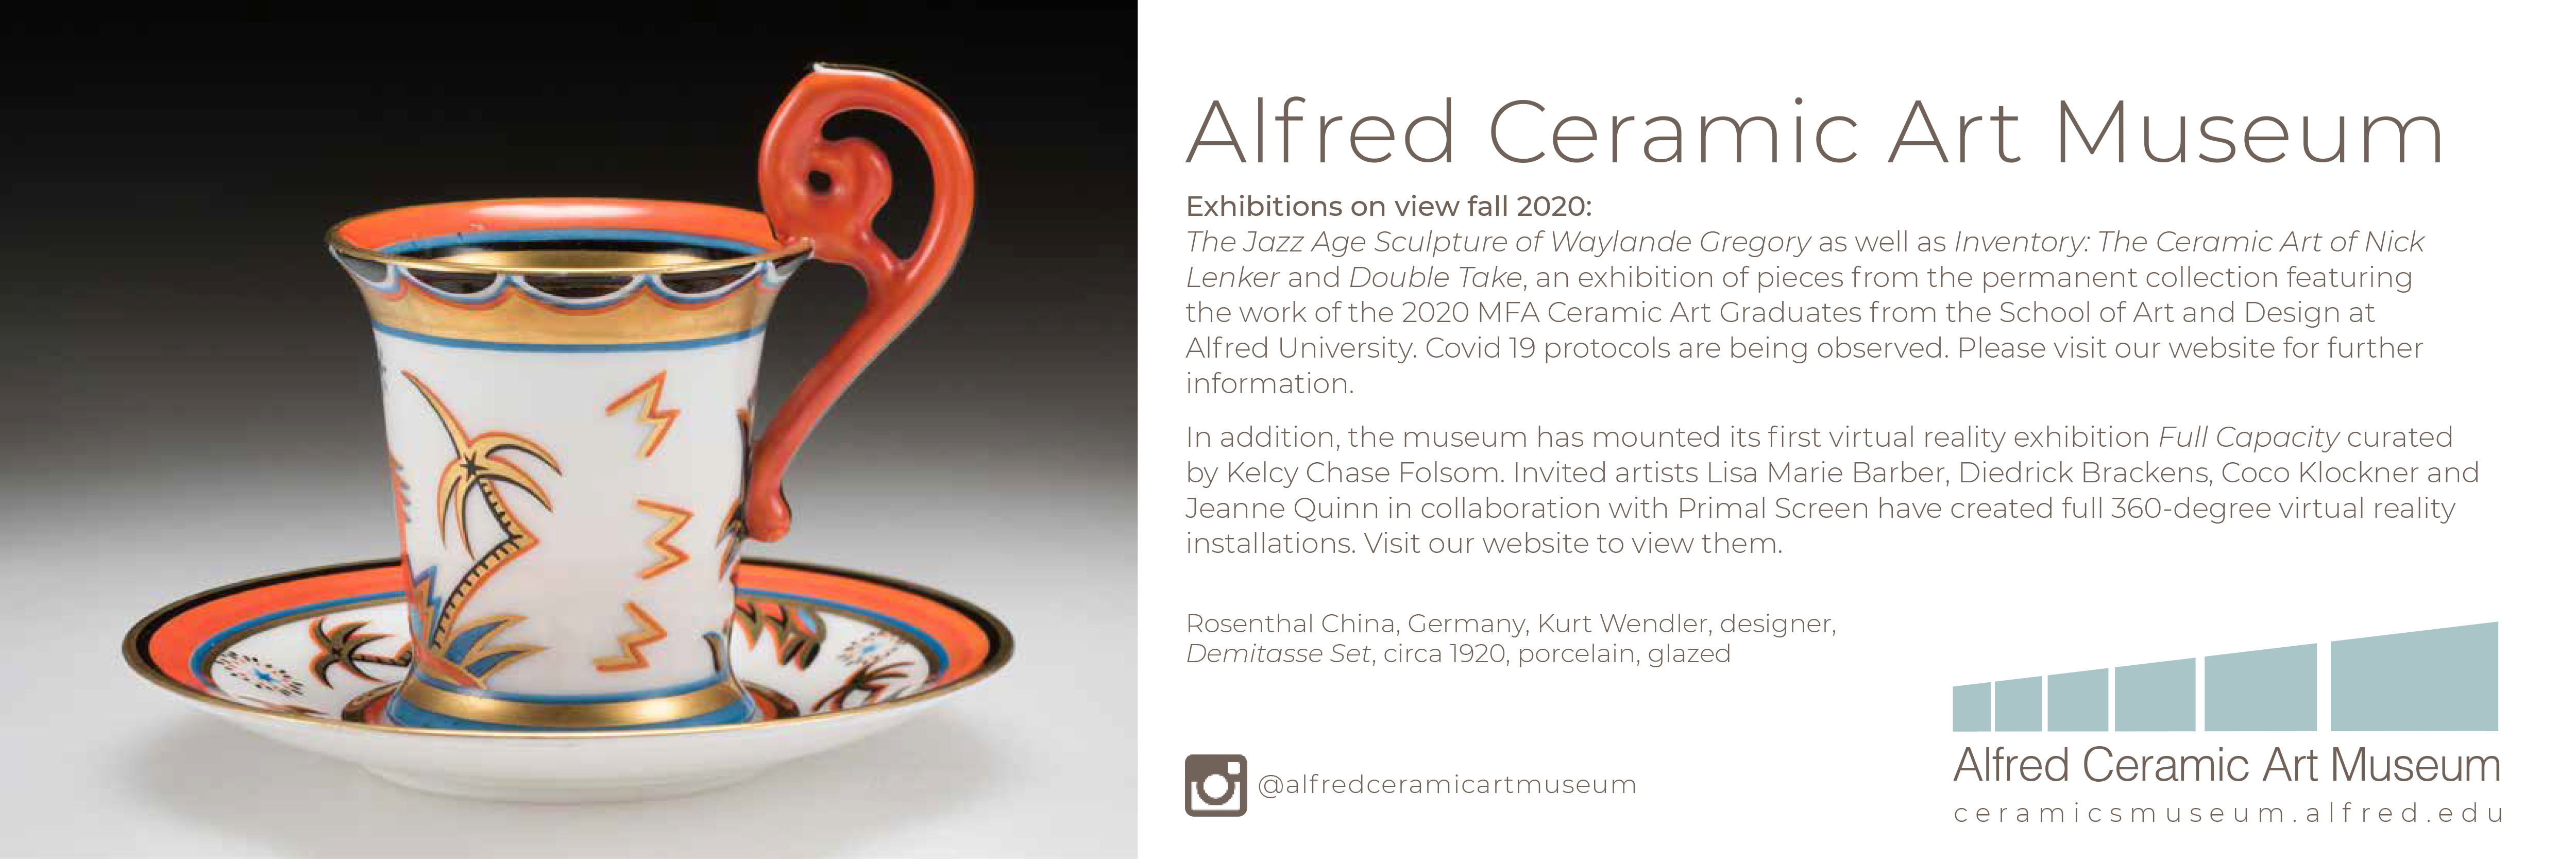 Ad from Alfred Ceramic Art Museum